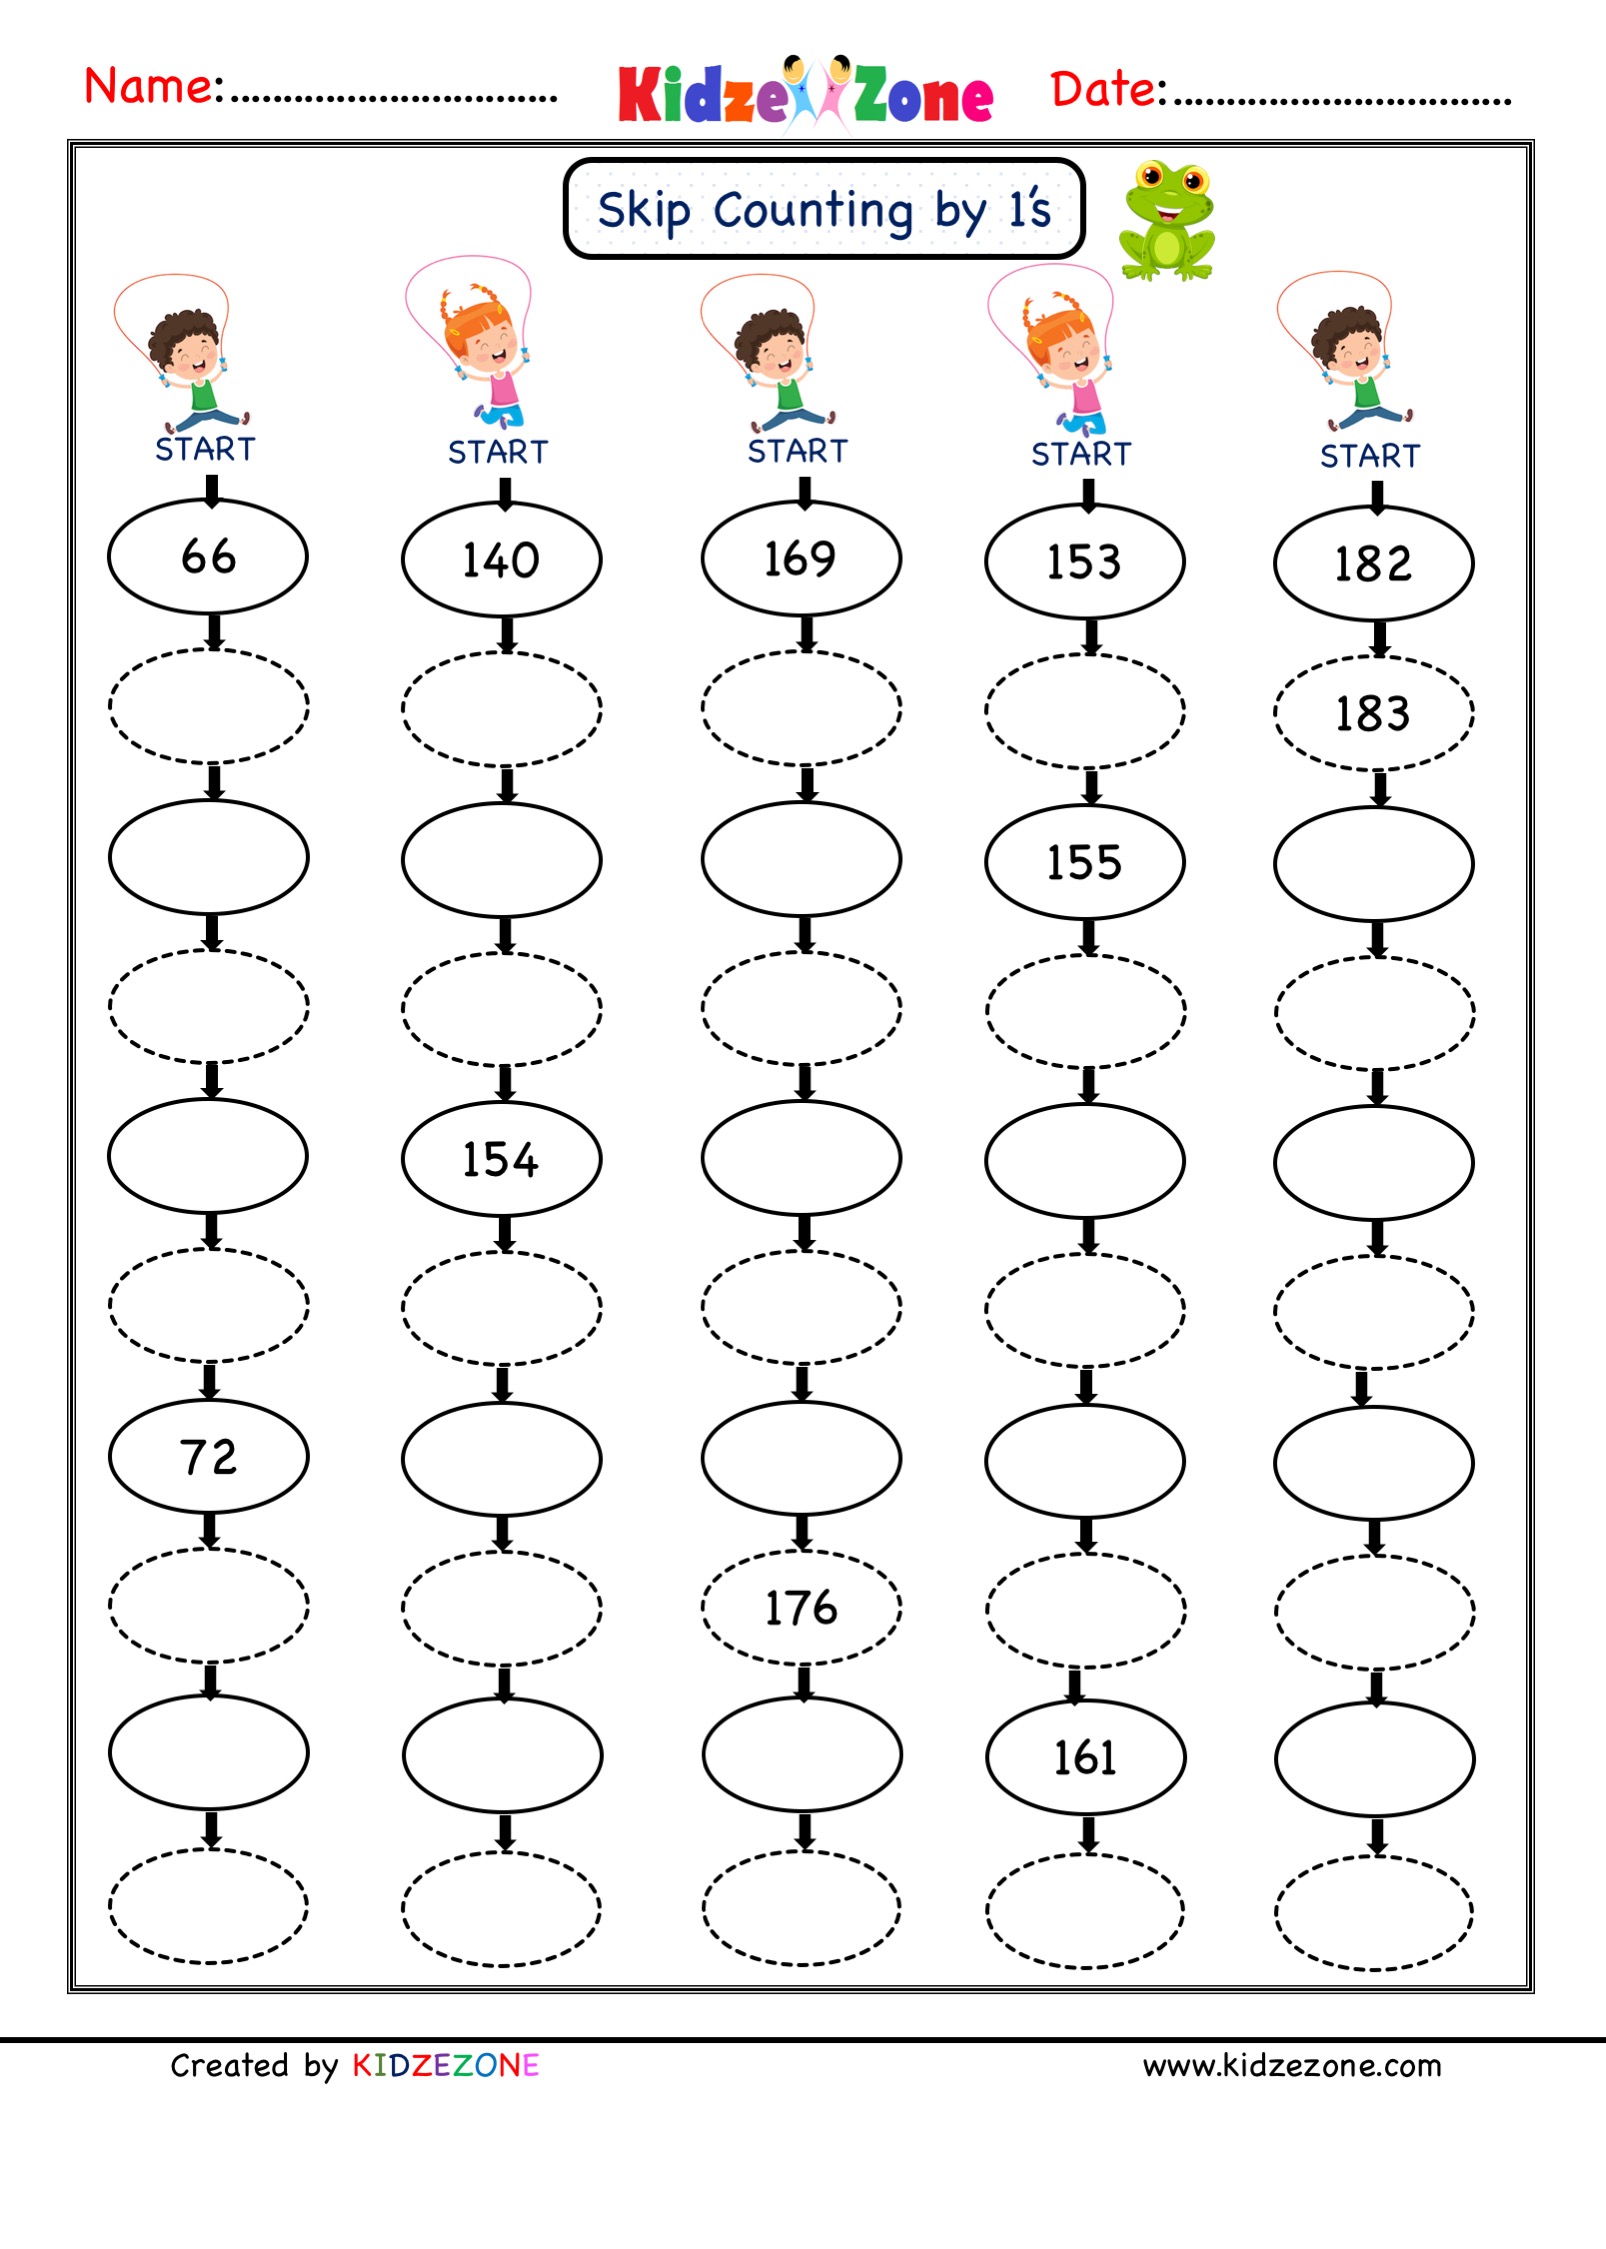 counting-by-5s-k5-learning-skip-counting-by-5s-worksheets-kristin-channge